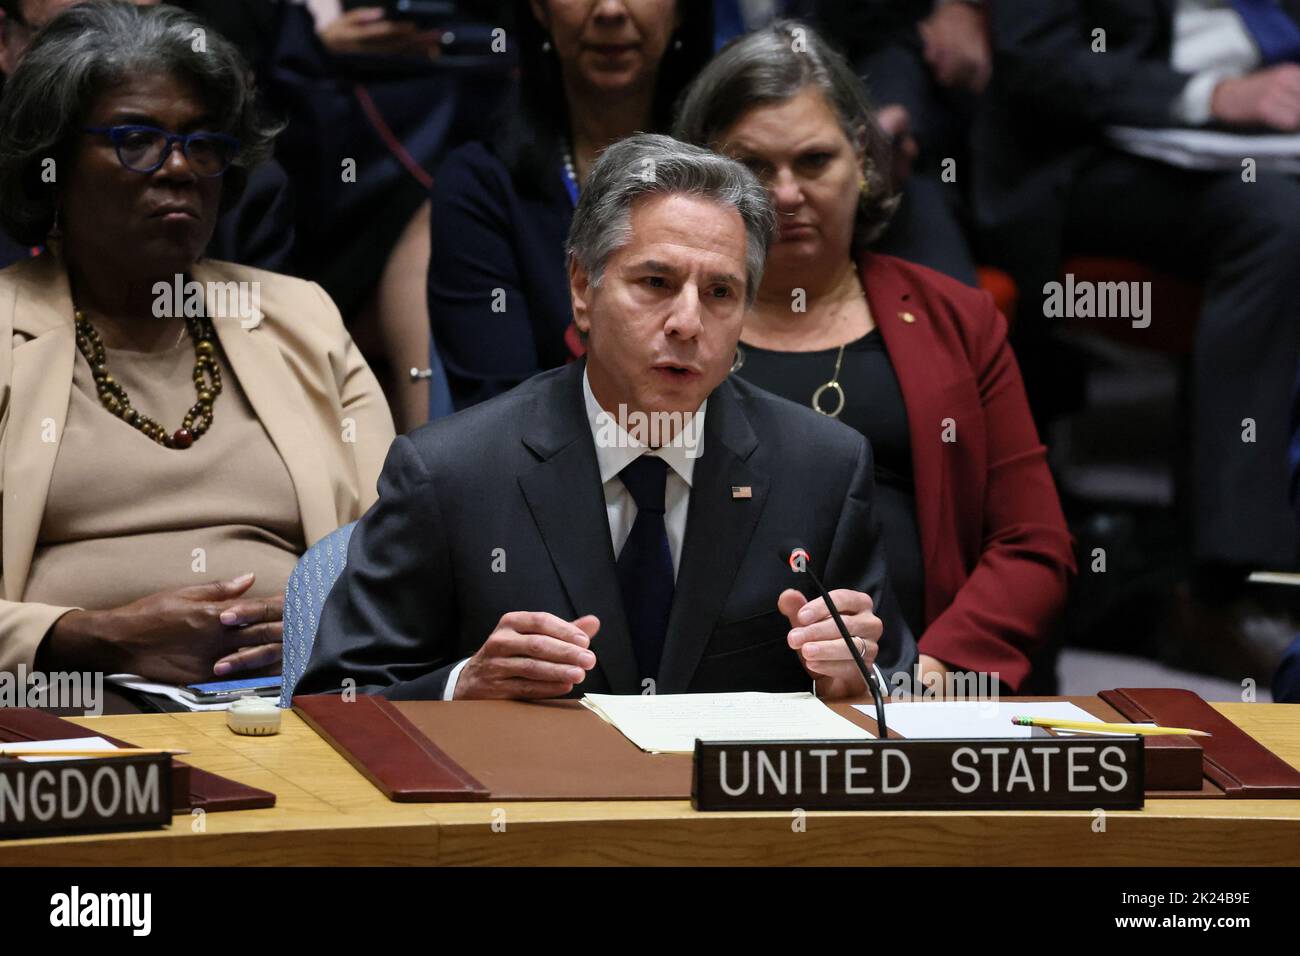 U.S. Secretary of State Antony Blinken speaks during a high level meeting of the United Nations Security Council on the situation amid Russia's invasion of Ukraine, at the 77th Session of the United Nations General Assembly at U.N. Headquarters in New York City, U.S., September 22, 2022. REUTERS/Brendan McDermid Stock Photo